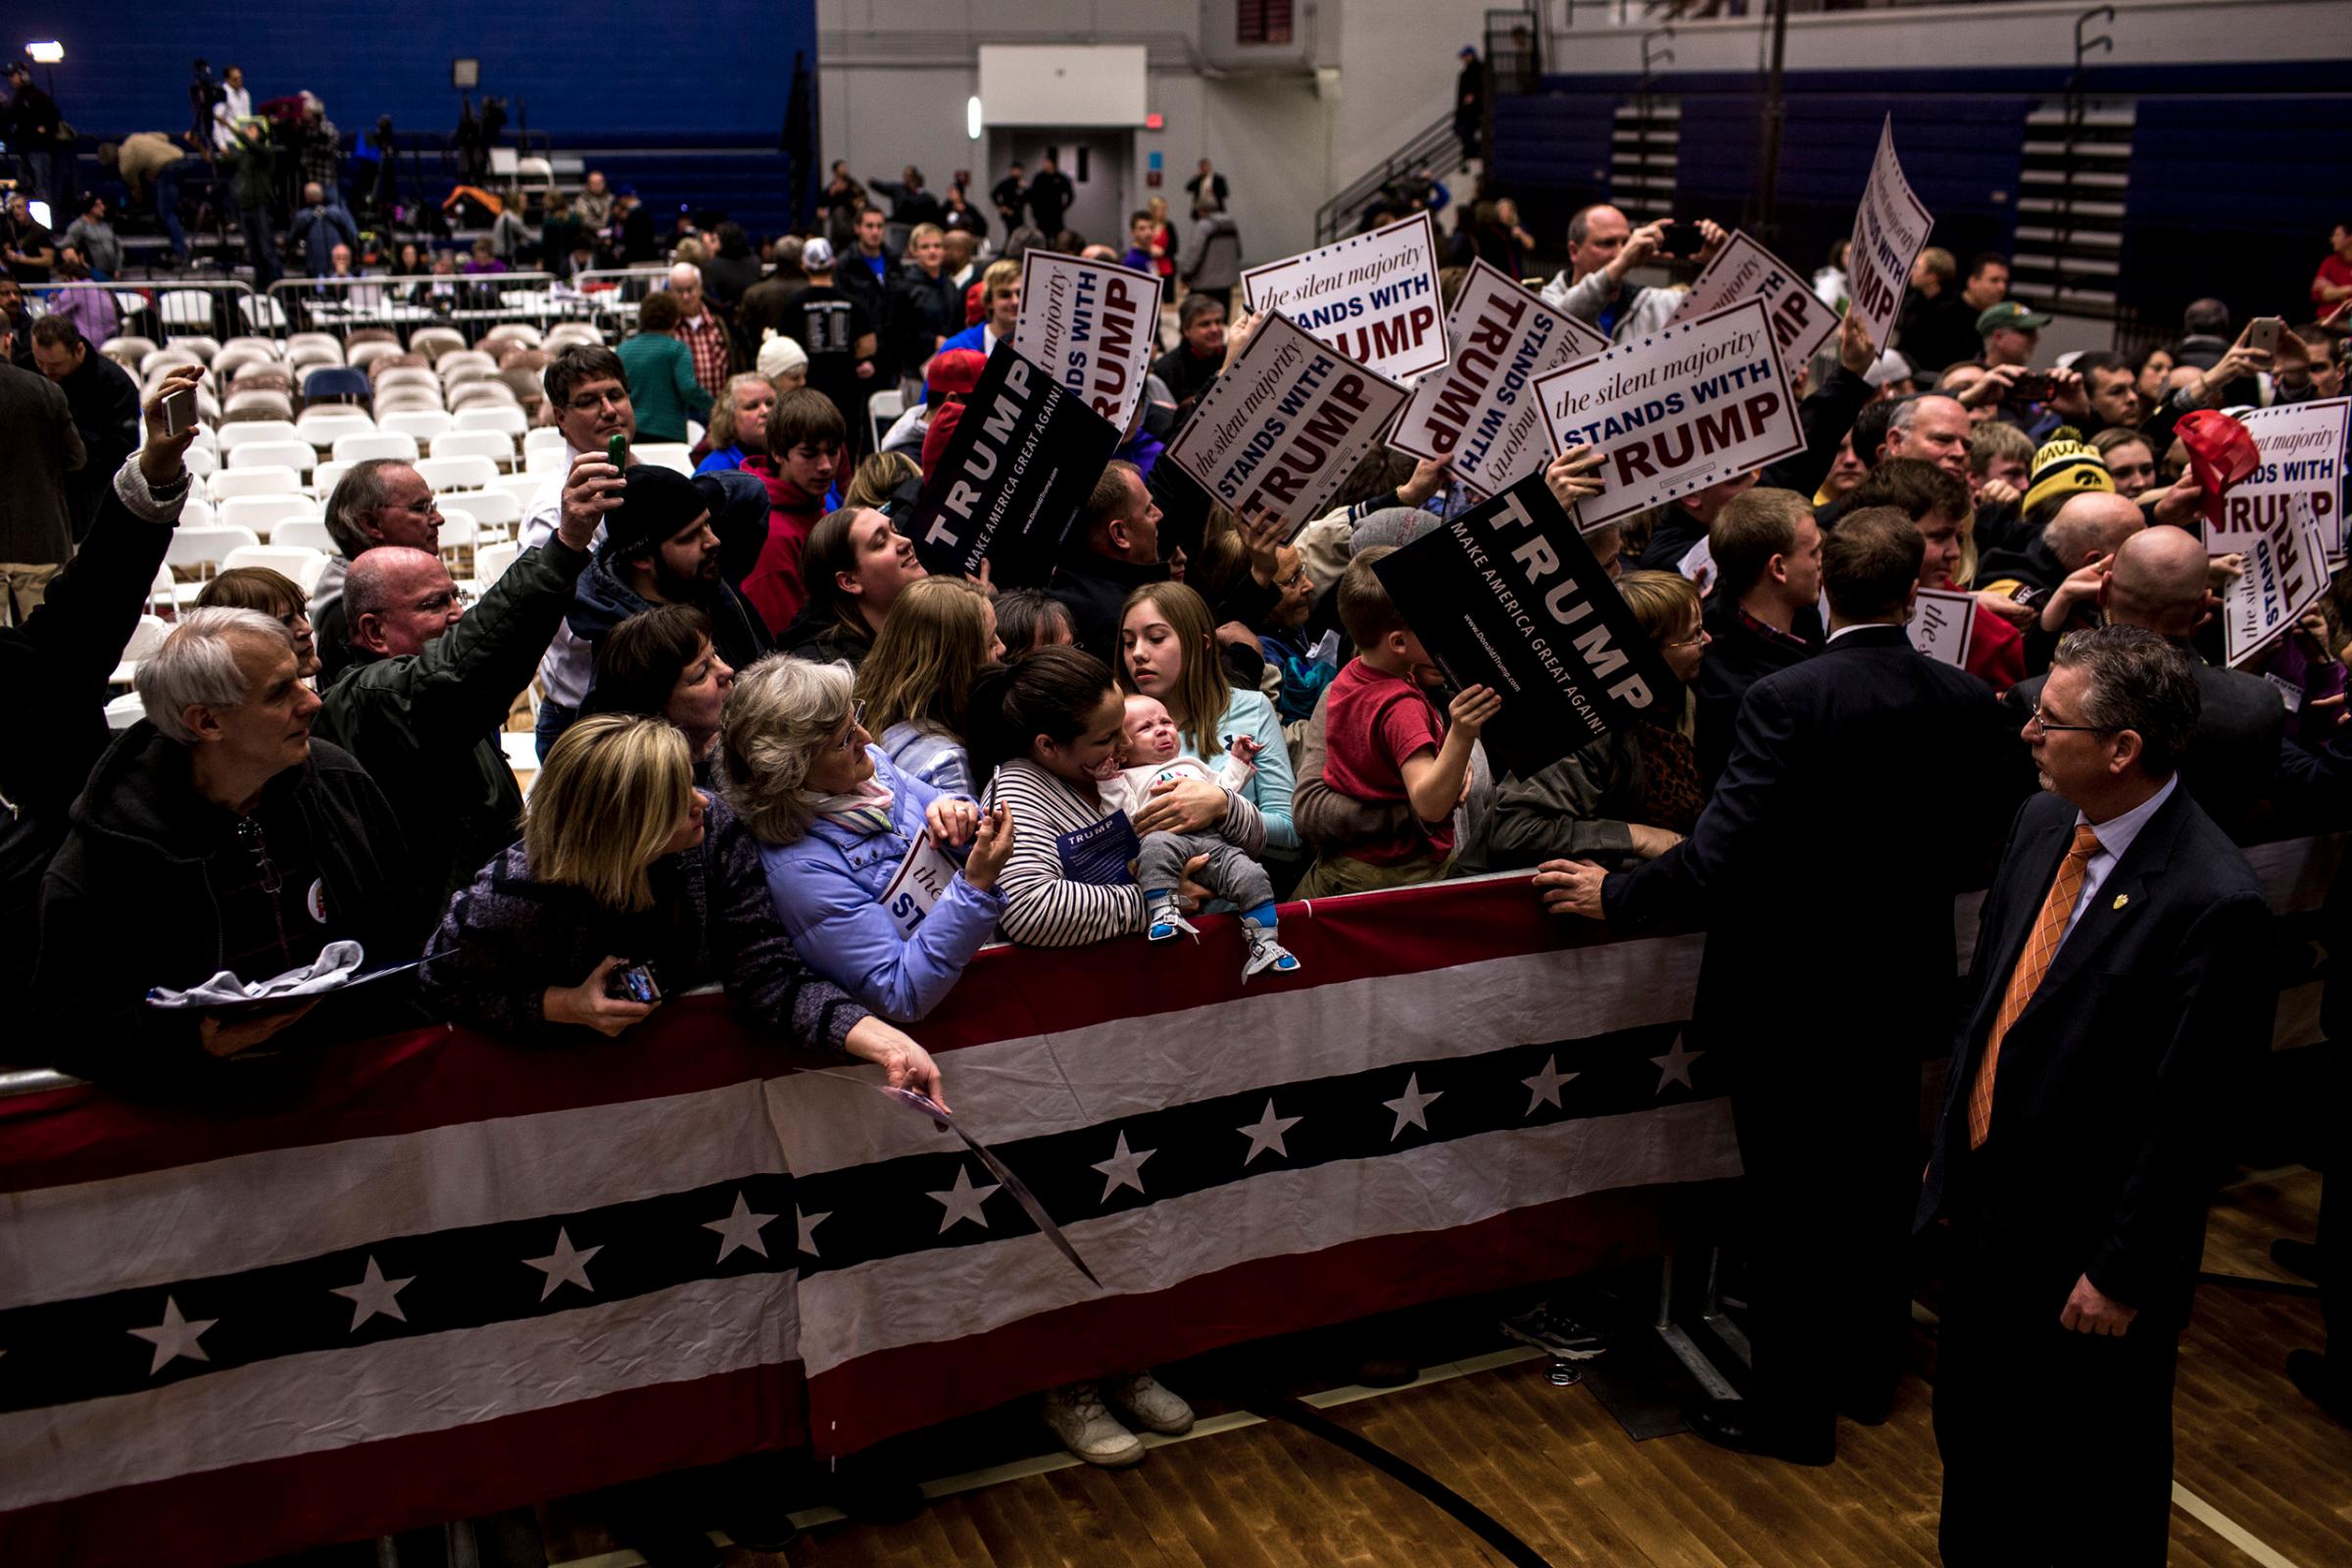 January 26, 2016. Des Moines Iowa. A Donald Trump Rally at Marshalltown Community School District - Roundhouse Gymnasium. As Iowa's Caucuses approach, candidates converge on the state for campaign events. On Monday evening democratic candidates Clinton, O'Malley and Sanders held a Town Hall sponsored by CCN at Drake University in Des Moines. (Natalie Keyssar)